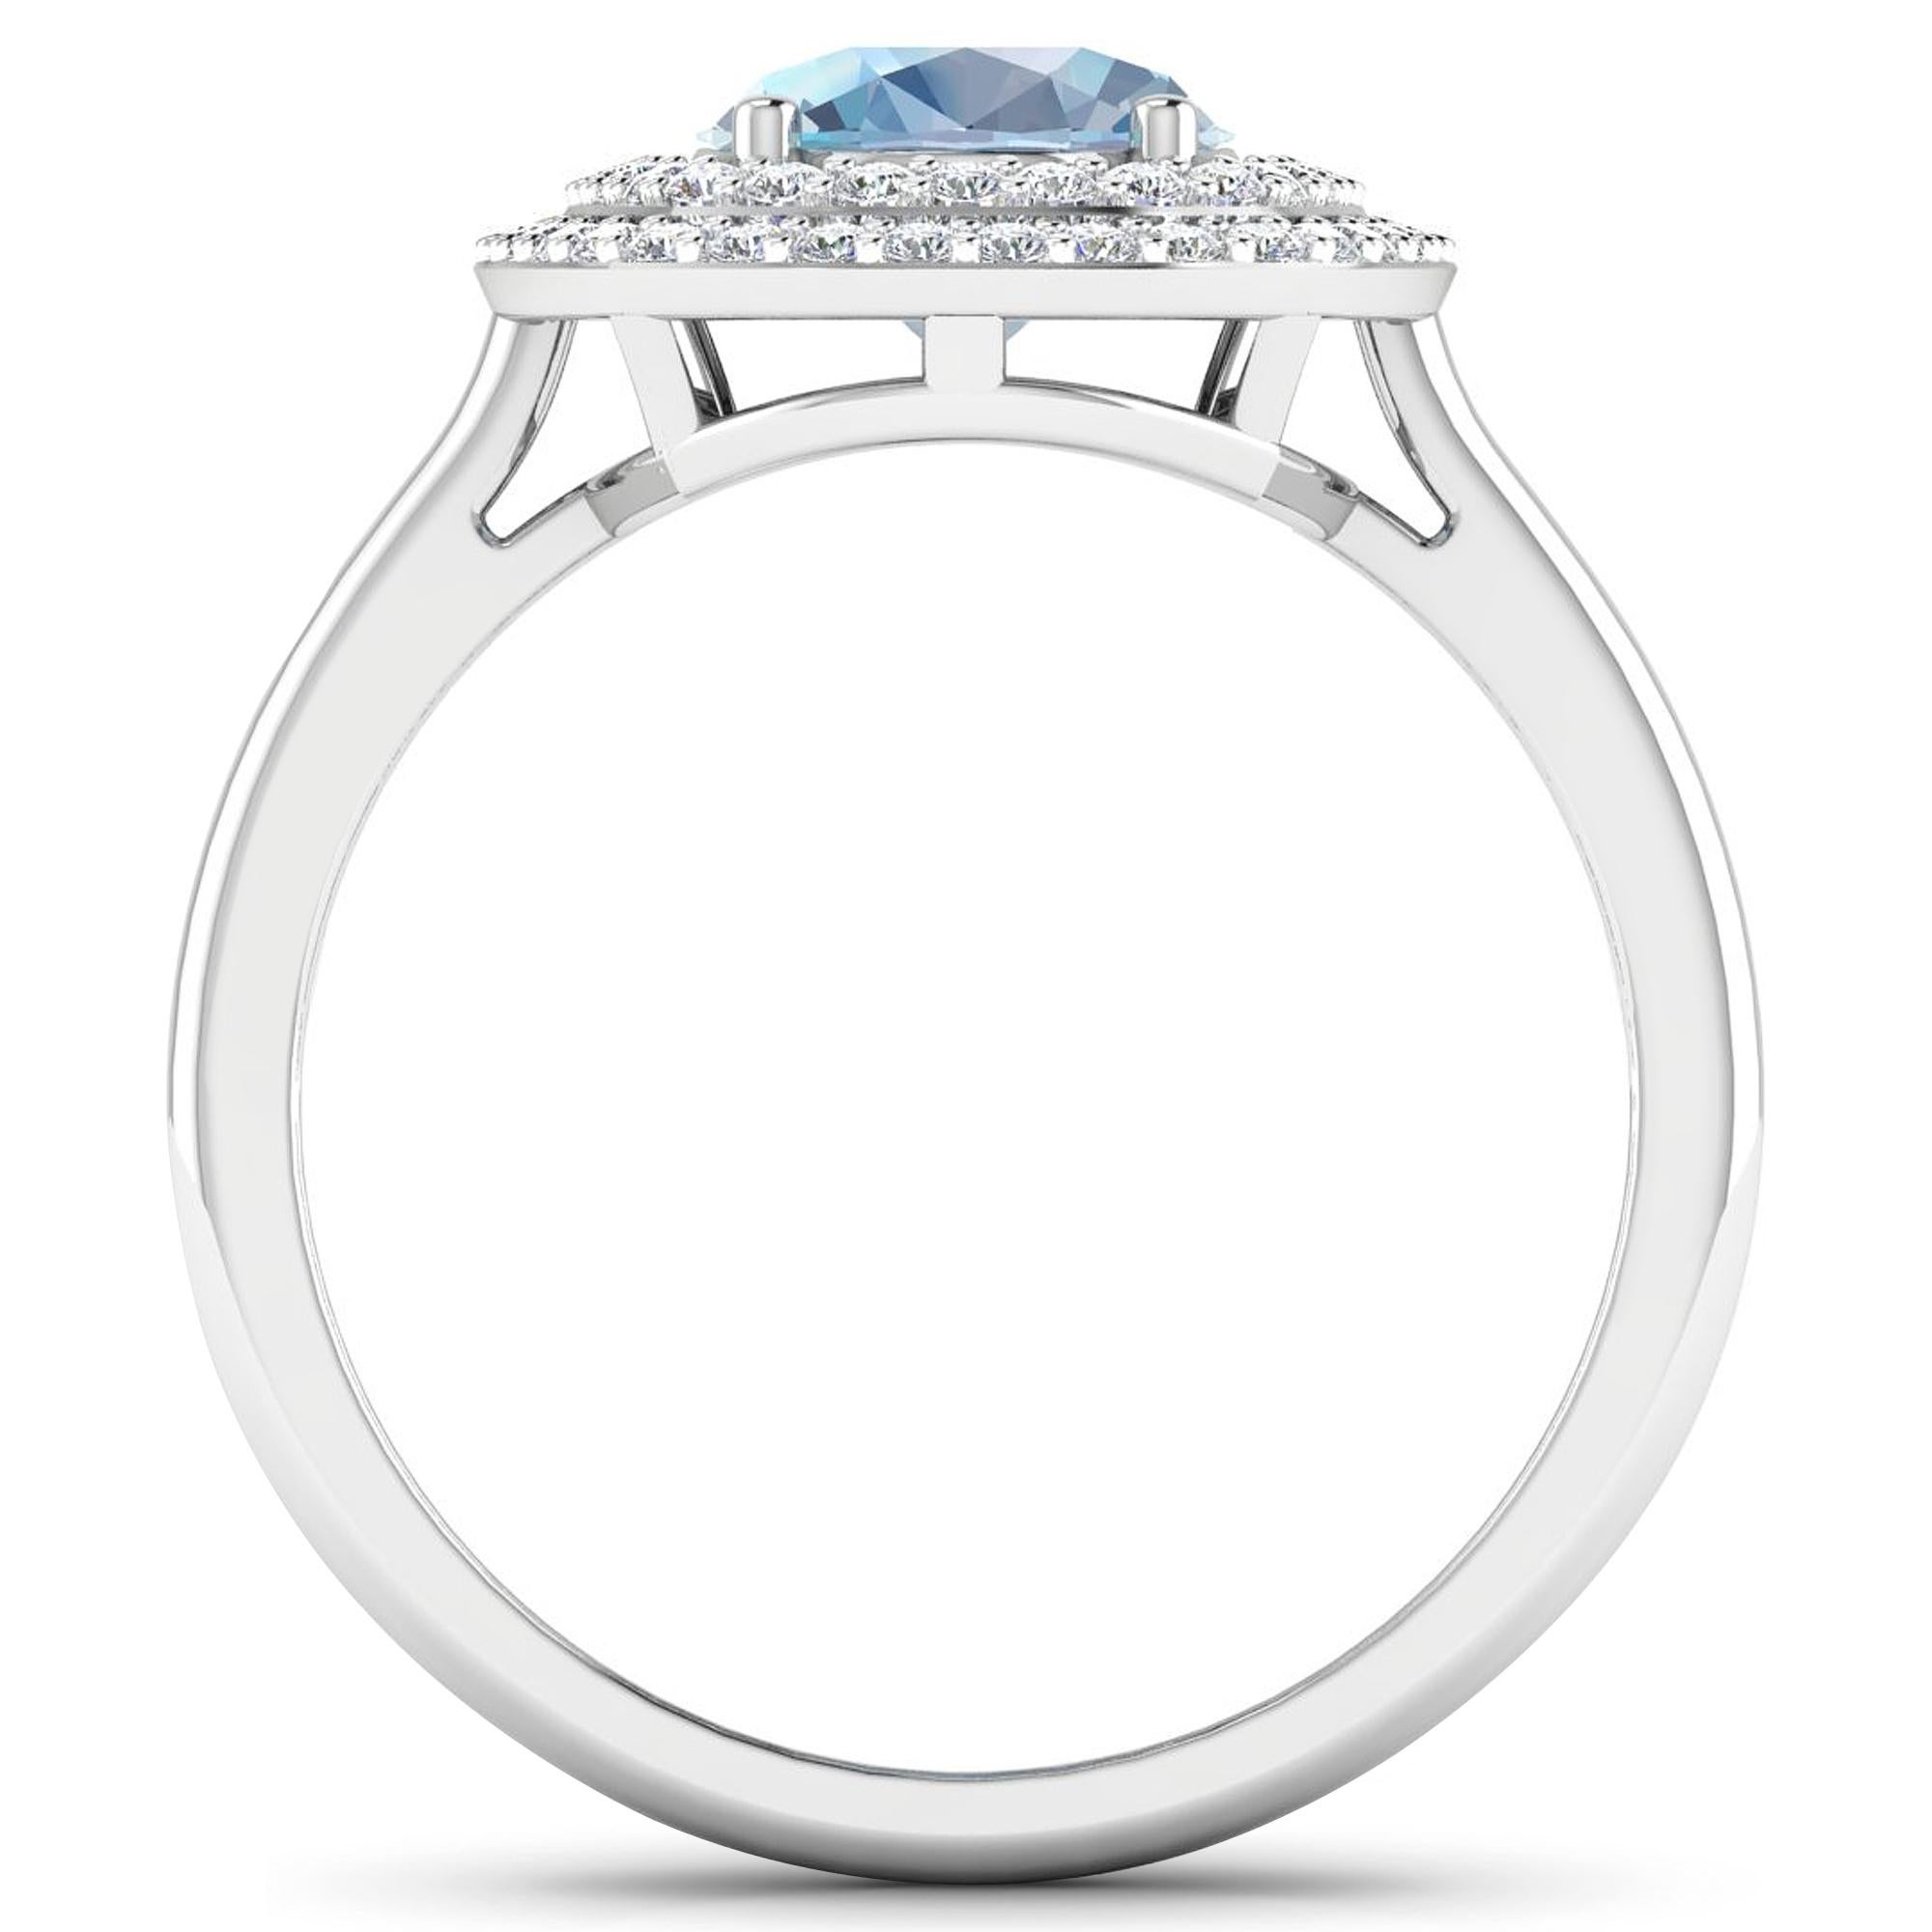 Aquamarine Gold Ring, 14Kt Gold Aquamarine & Diamond Engagement Ring, 1.68ctw.

Flaunt yourself with this 14K White Gold Aquamarine & White Diamond Engagement Ring. The setting is inlaid with 62 accented full-cut White Diamond round stones for a